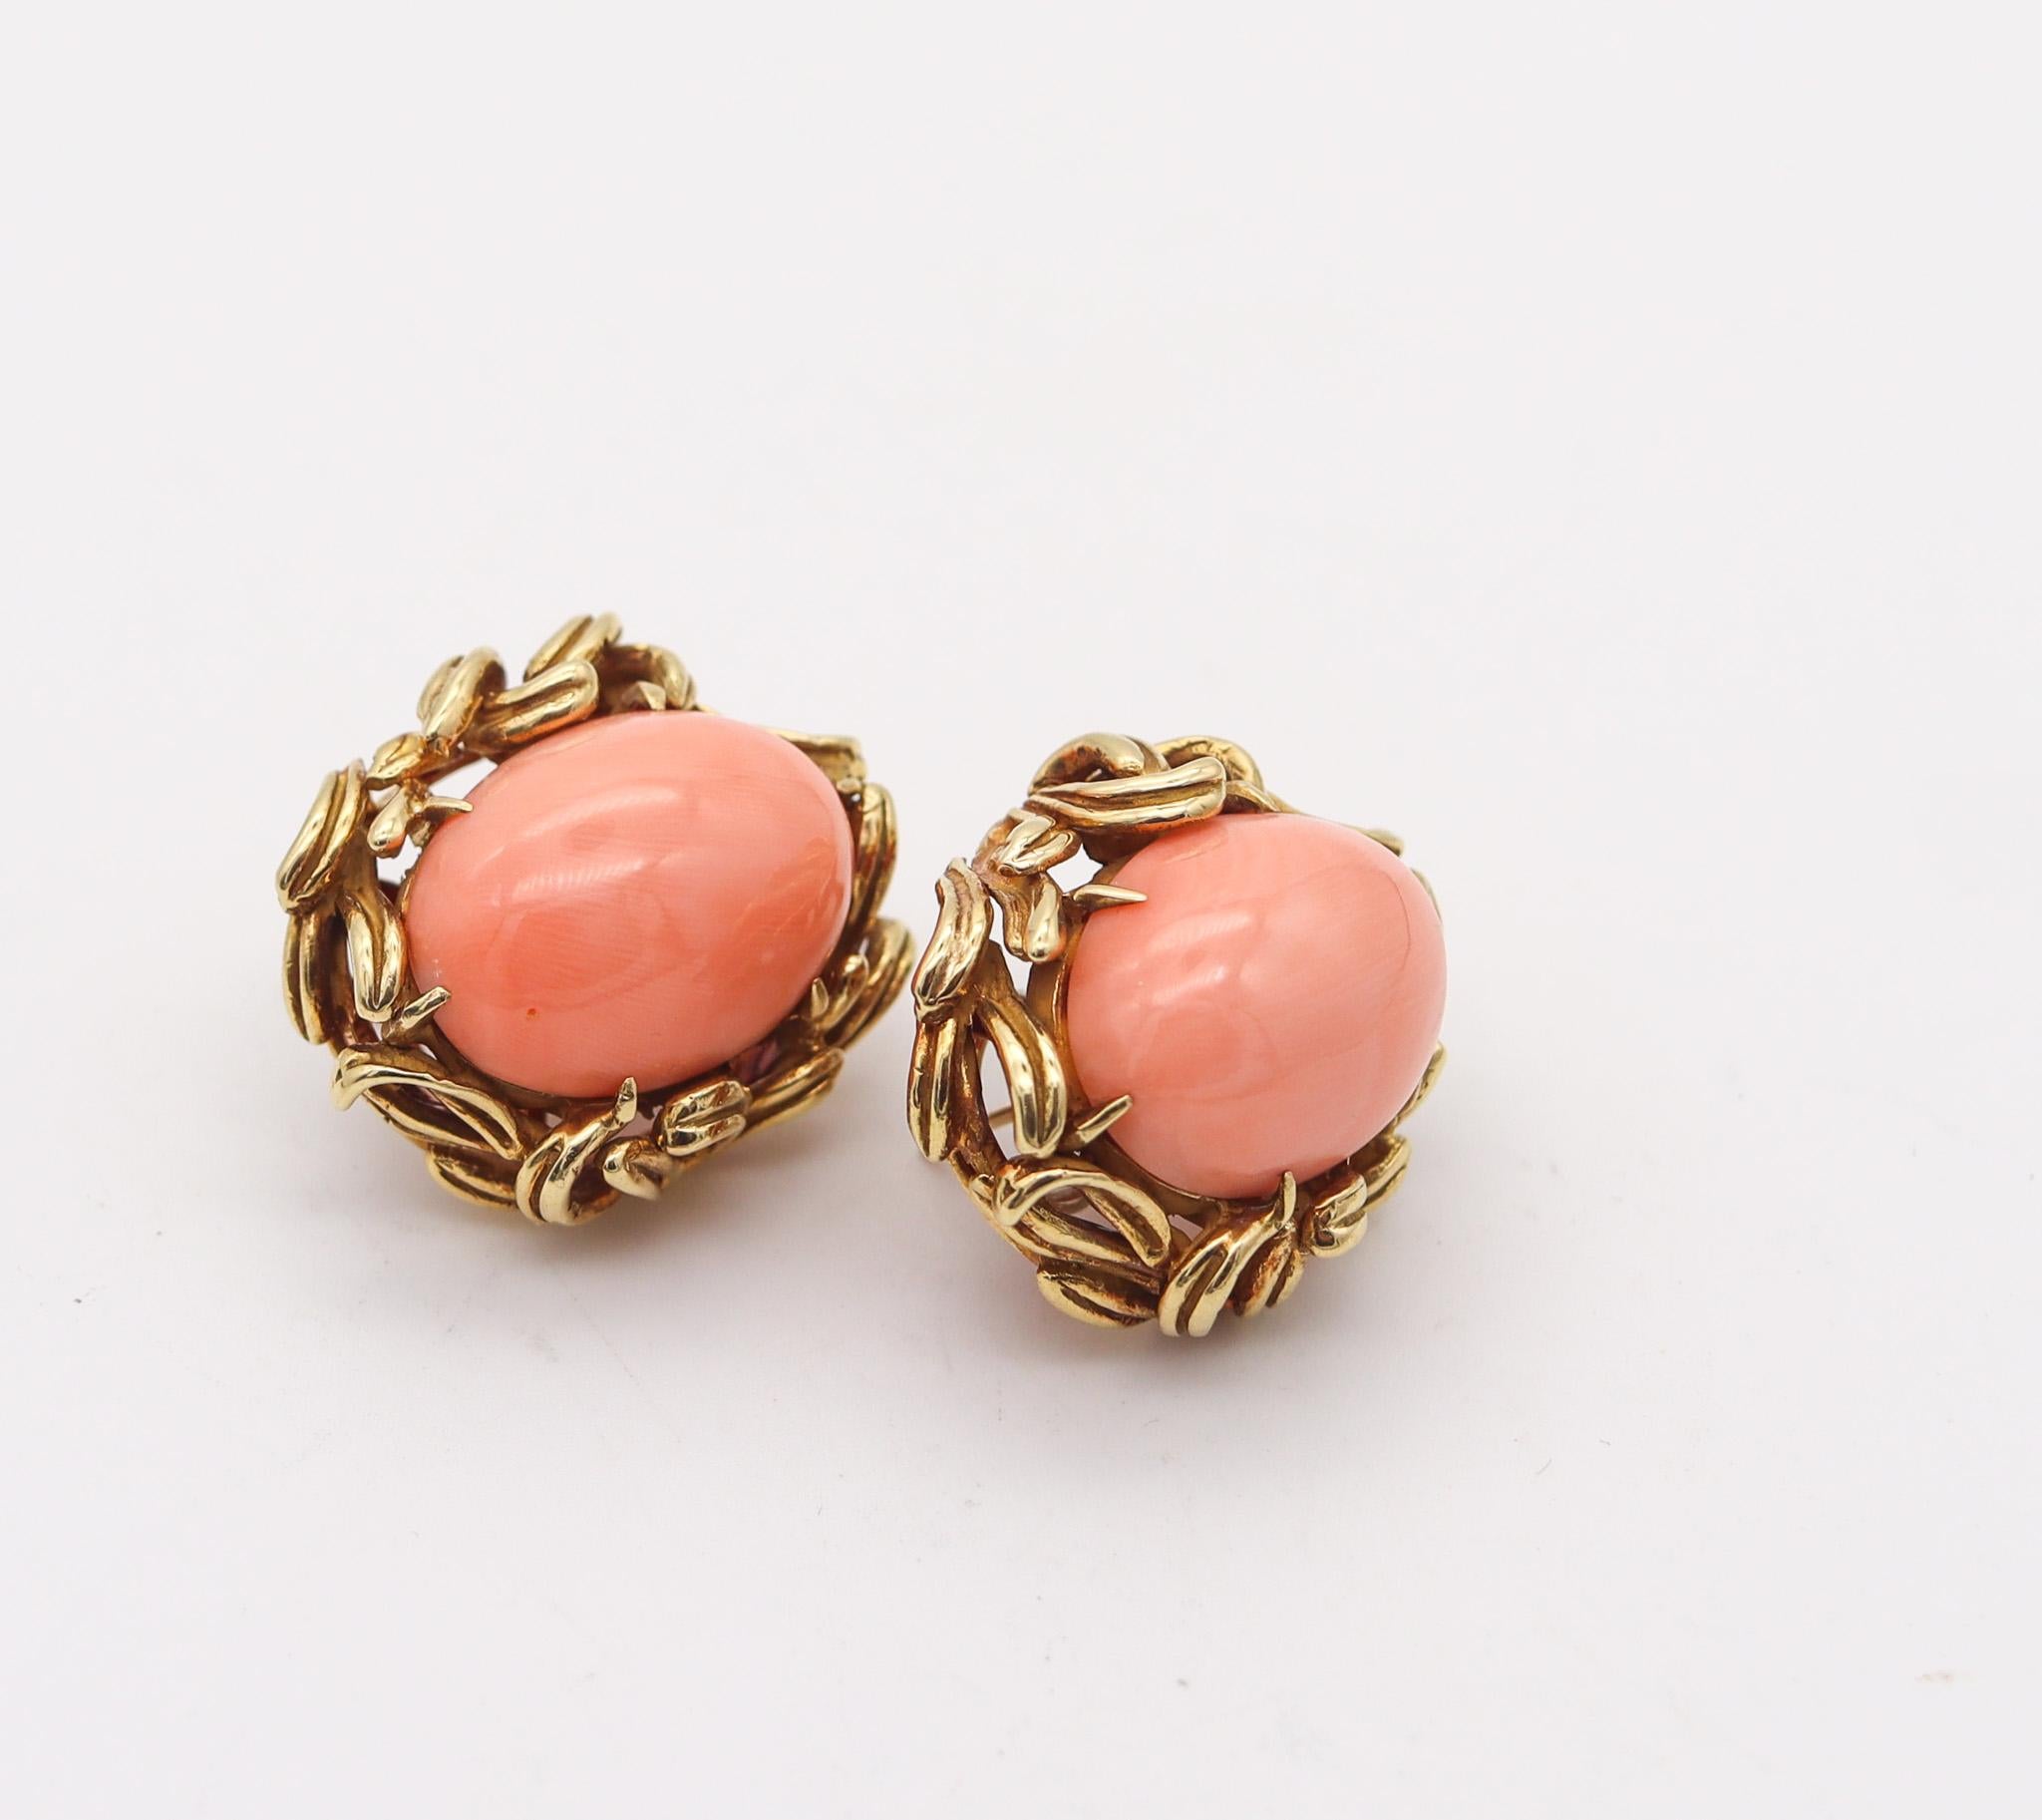 Modernist Italian 1960 Mid Century Clips Earrings In 18Kt Yellow Gold With Salmon Coral For Sale